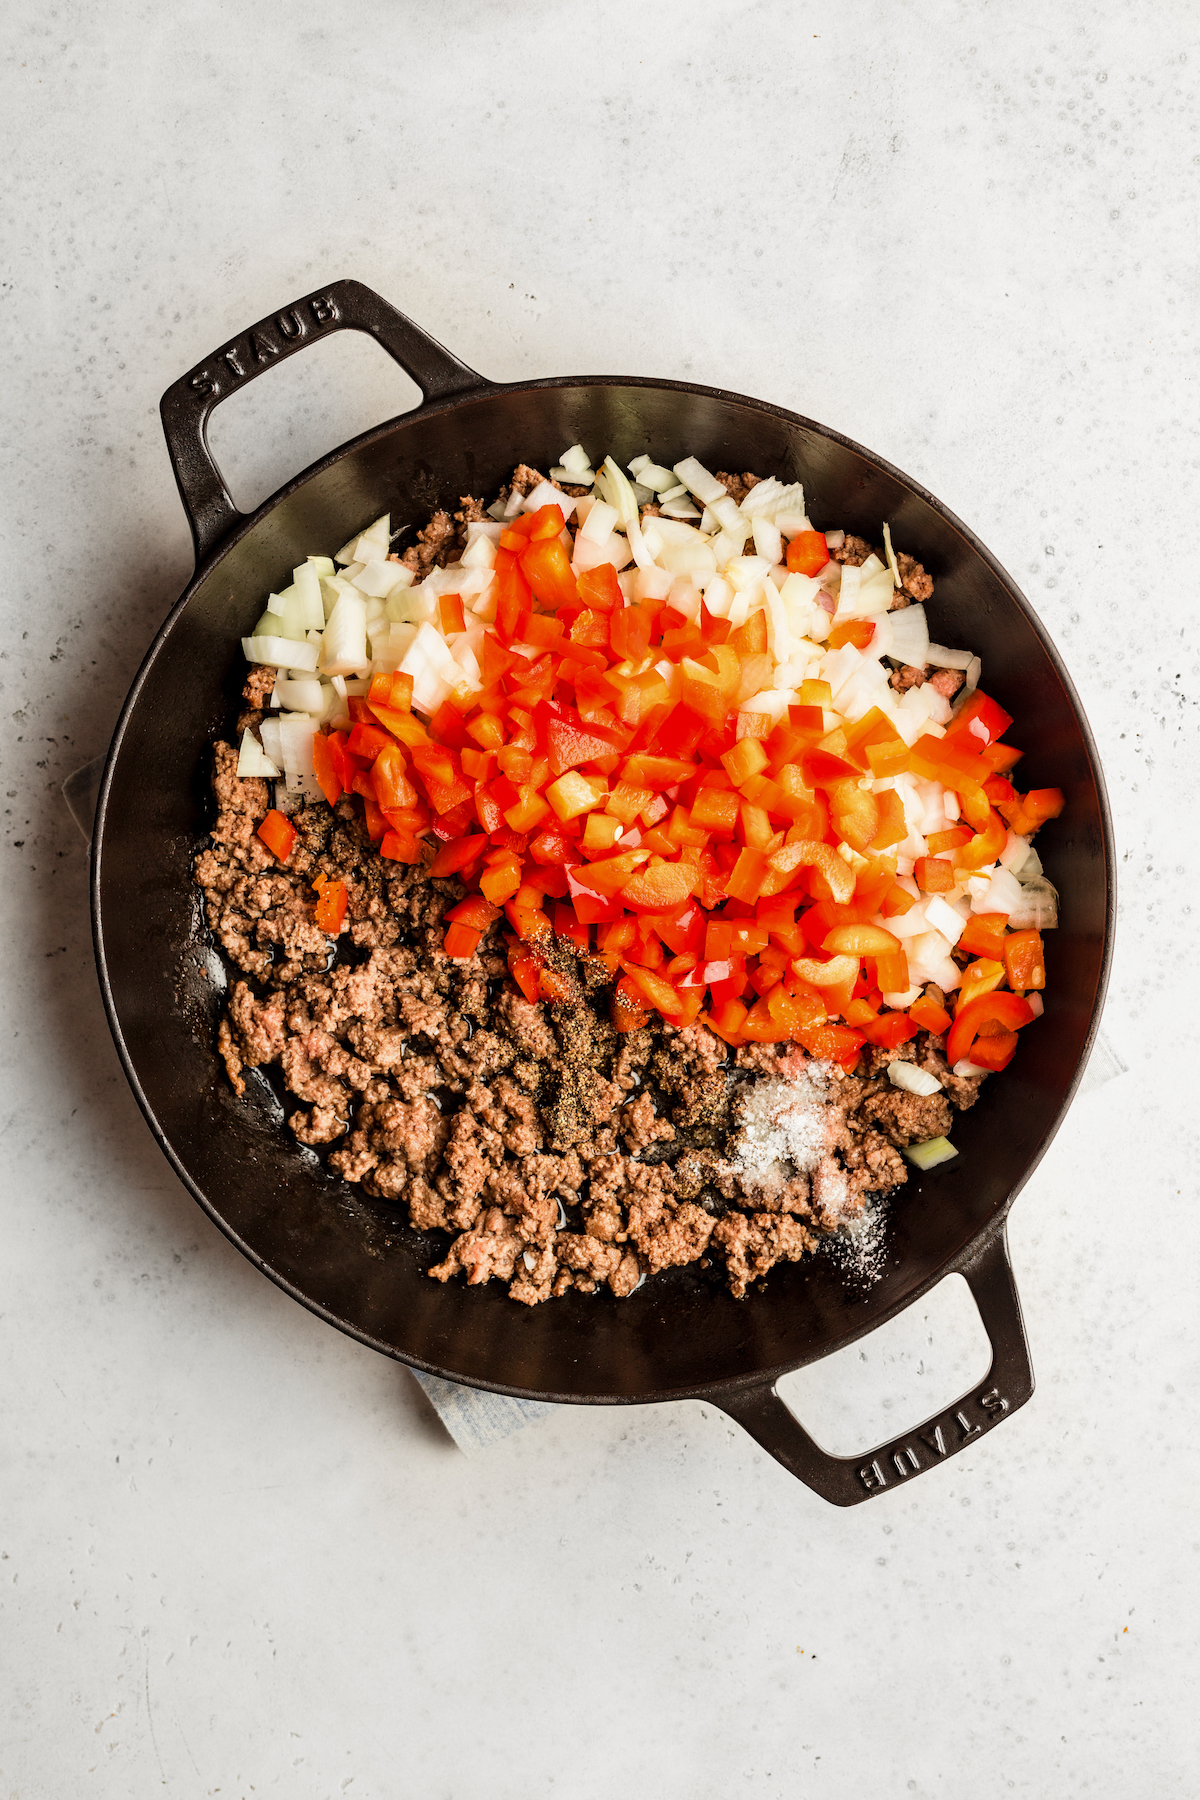 Ground beef and veggies in a two-handled skillet.